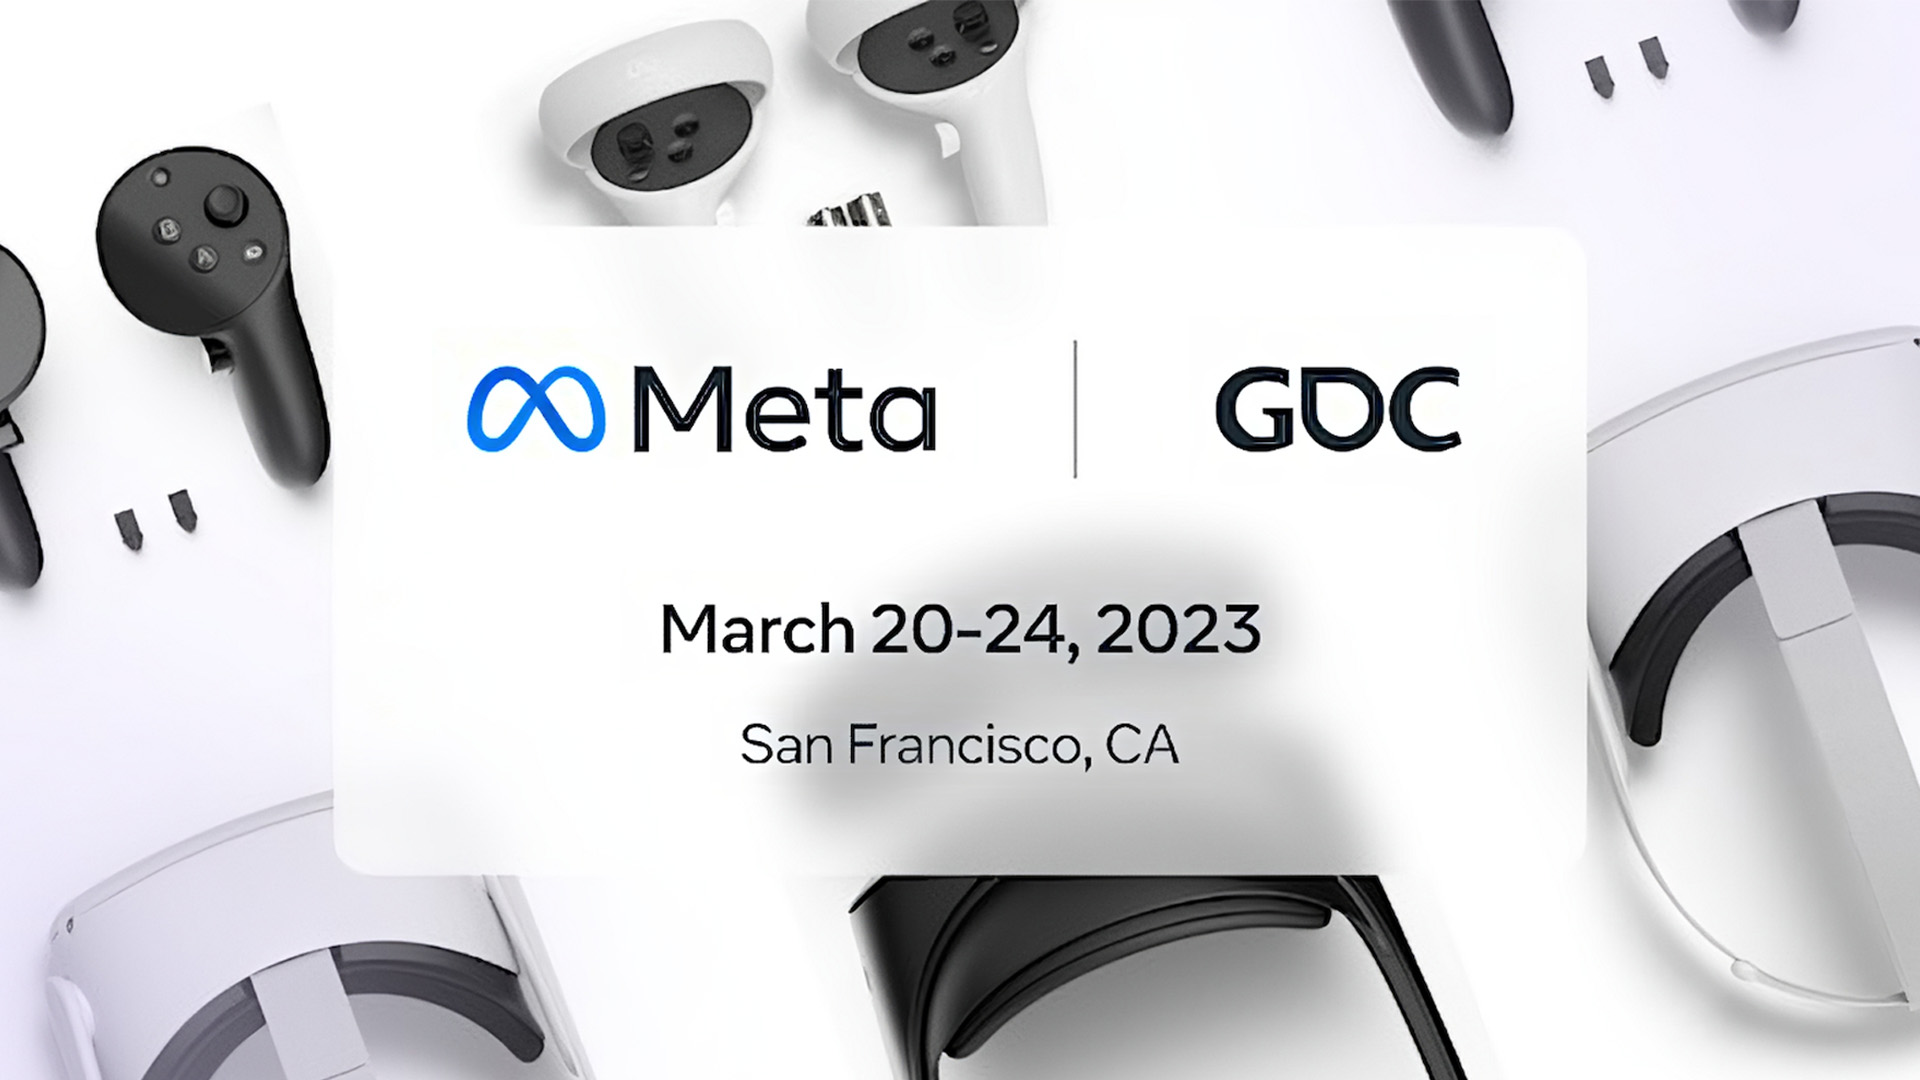 At GDC 2023, Meta promises a "peek into the future of VR technology"